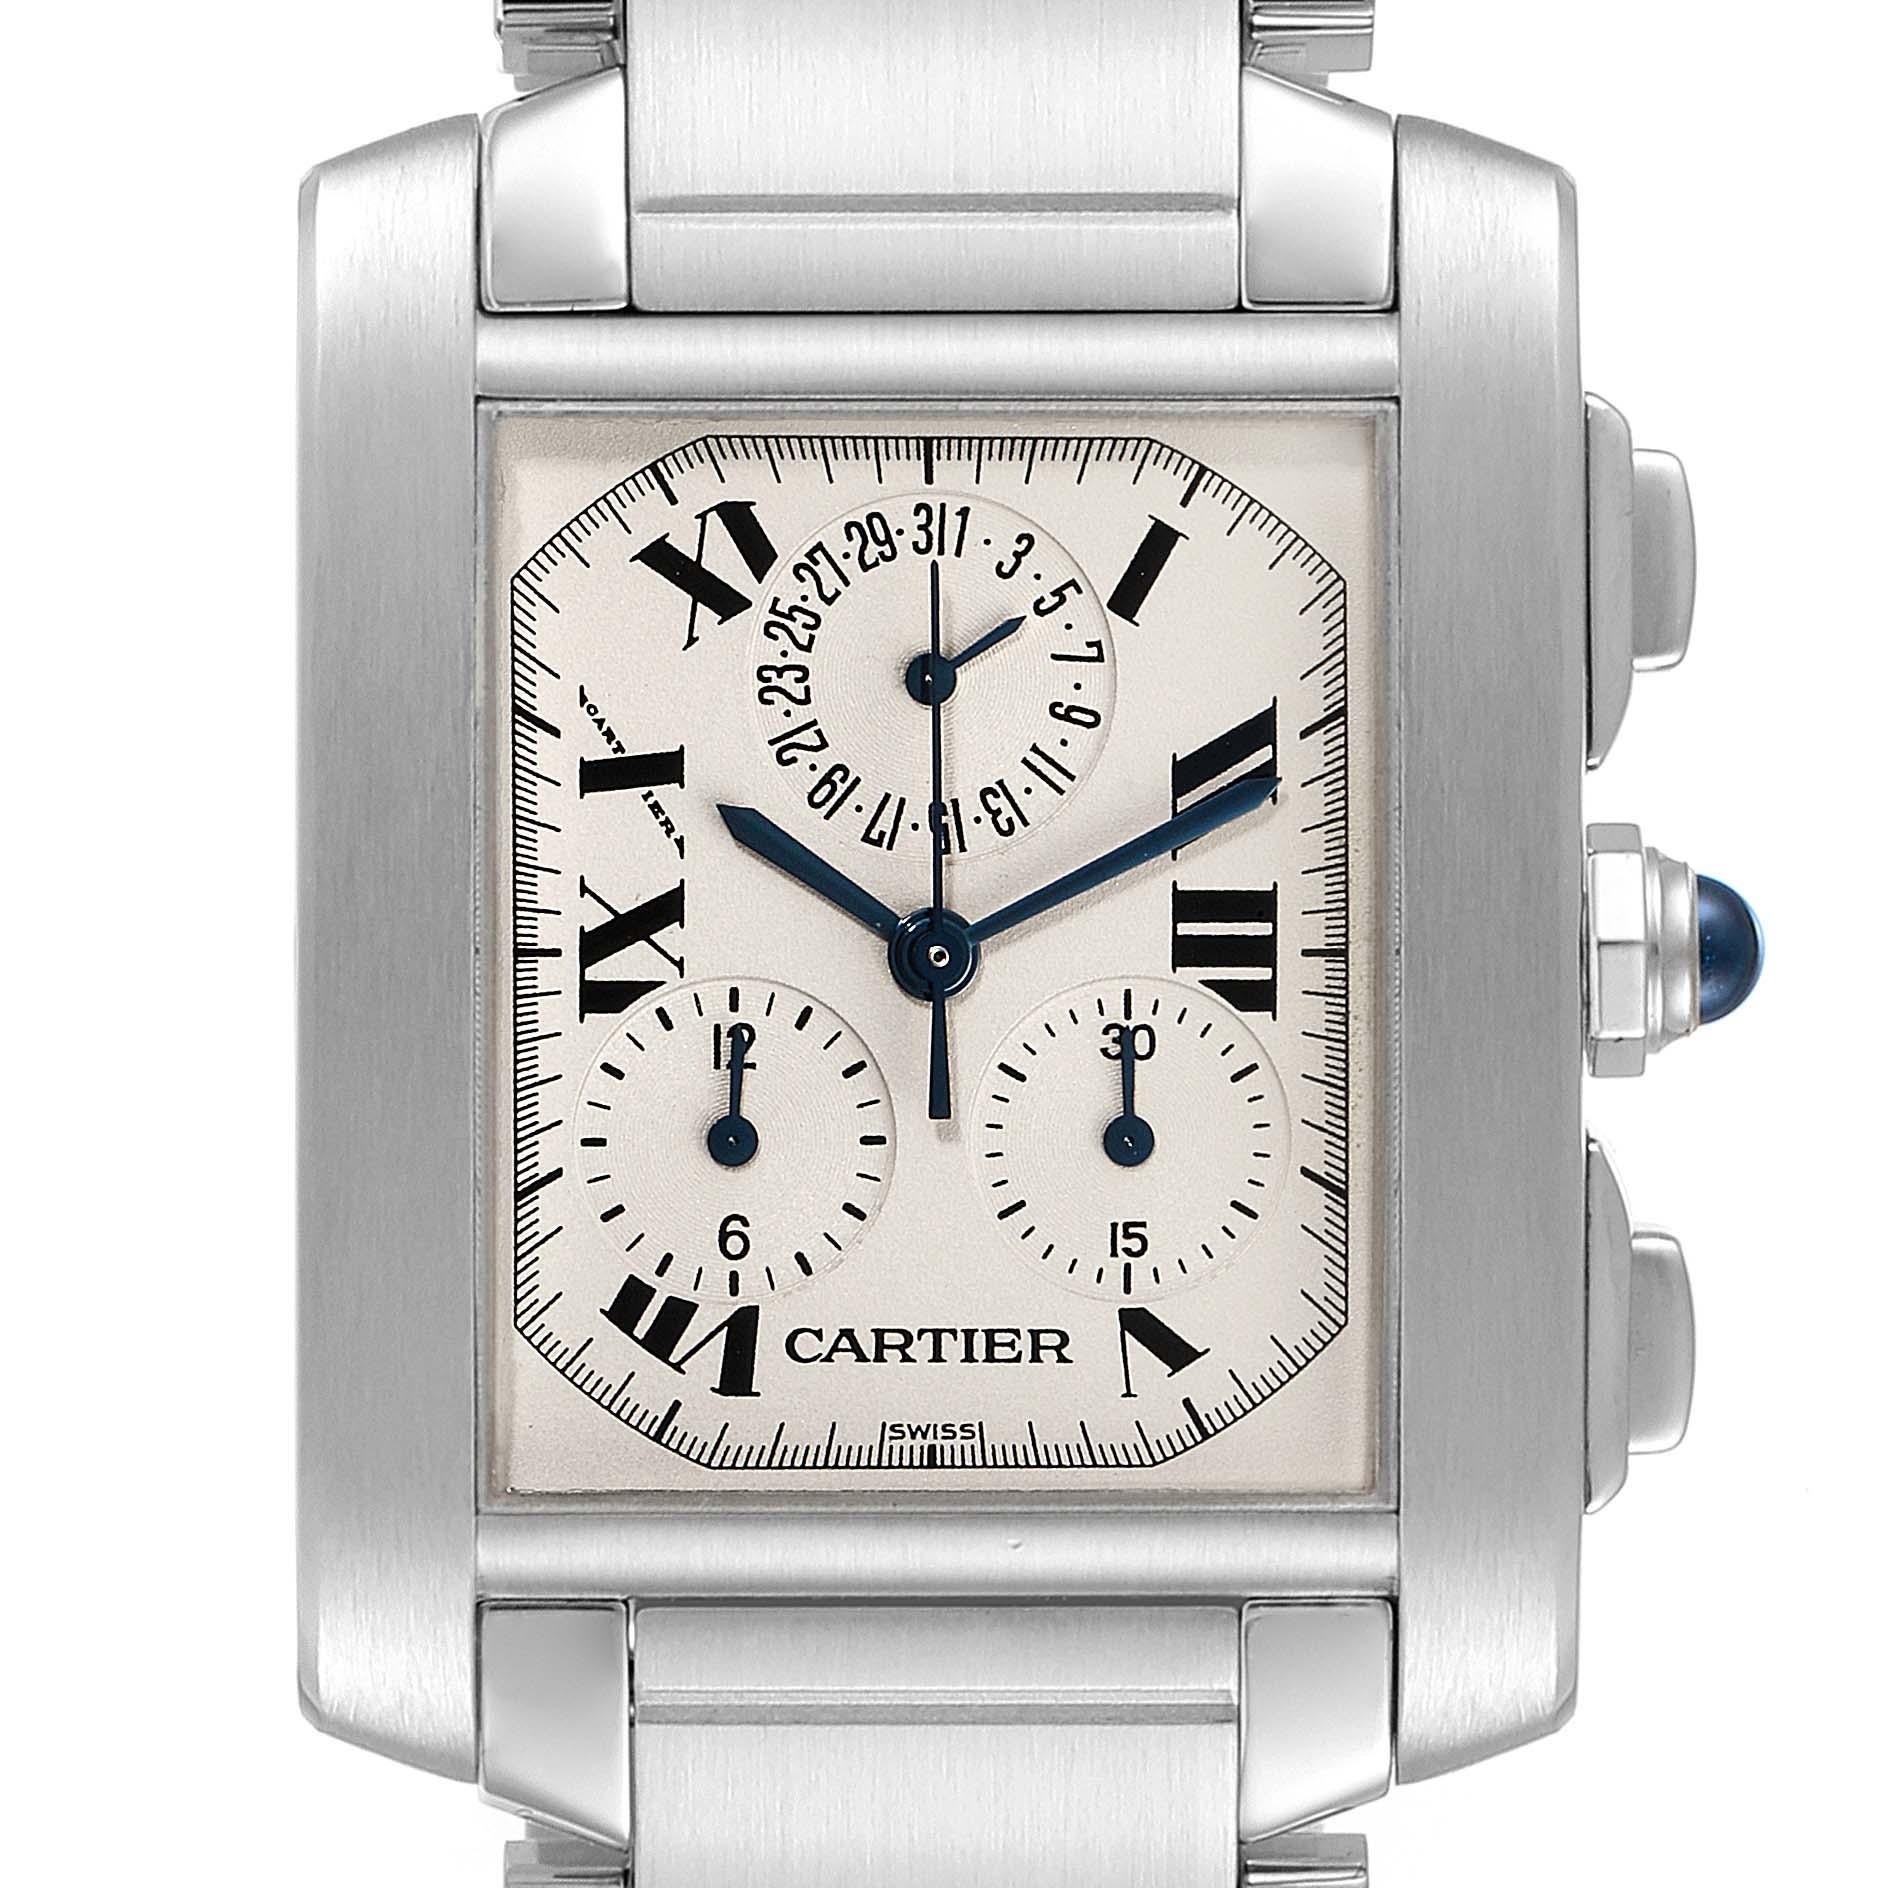 Cartier Tank Francaise Chronoflex Chronograph Steel Mens Watch W51001Q3. Quartz chronograph movement. Rectangular stainless steel 37.0 x 28.0 mm case. Octagonal crown set with a blue spinel cabochon. Stainless steel smooth bezel. Scratch resistant